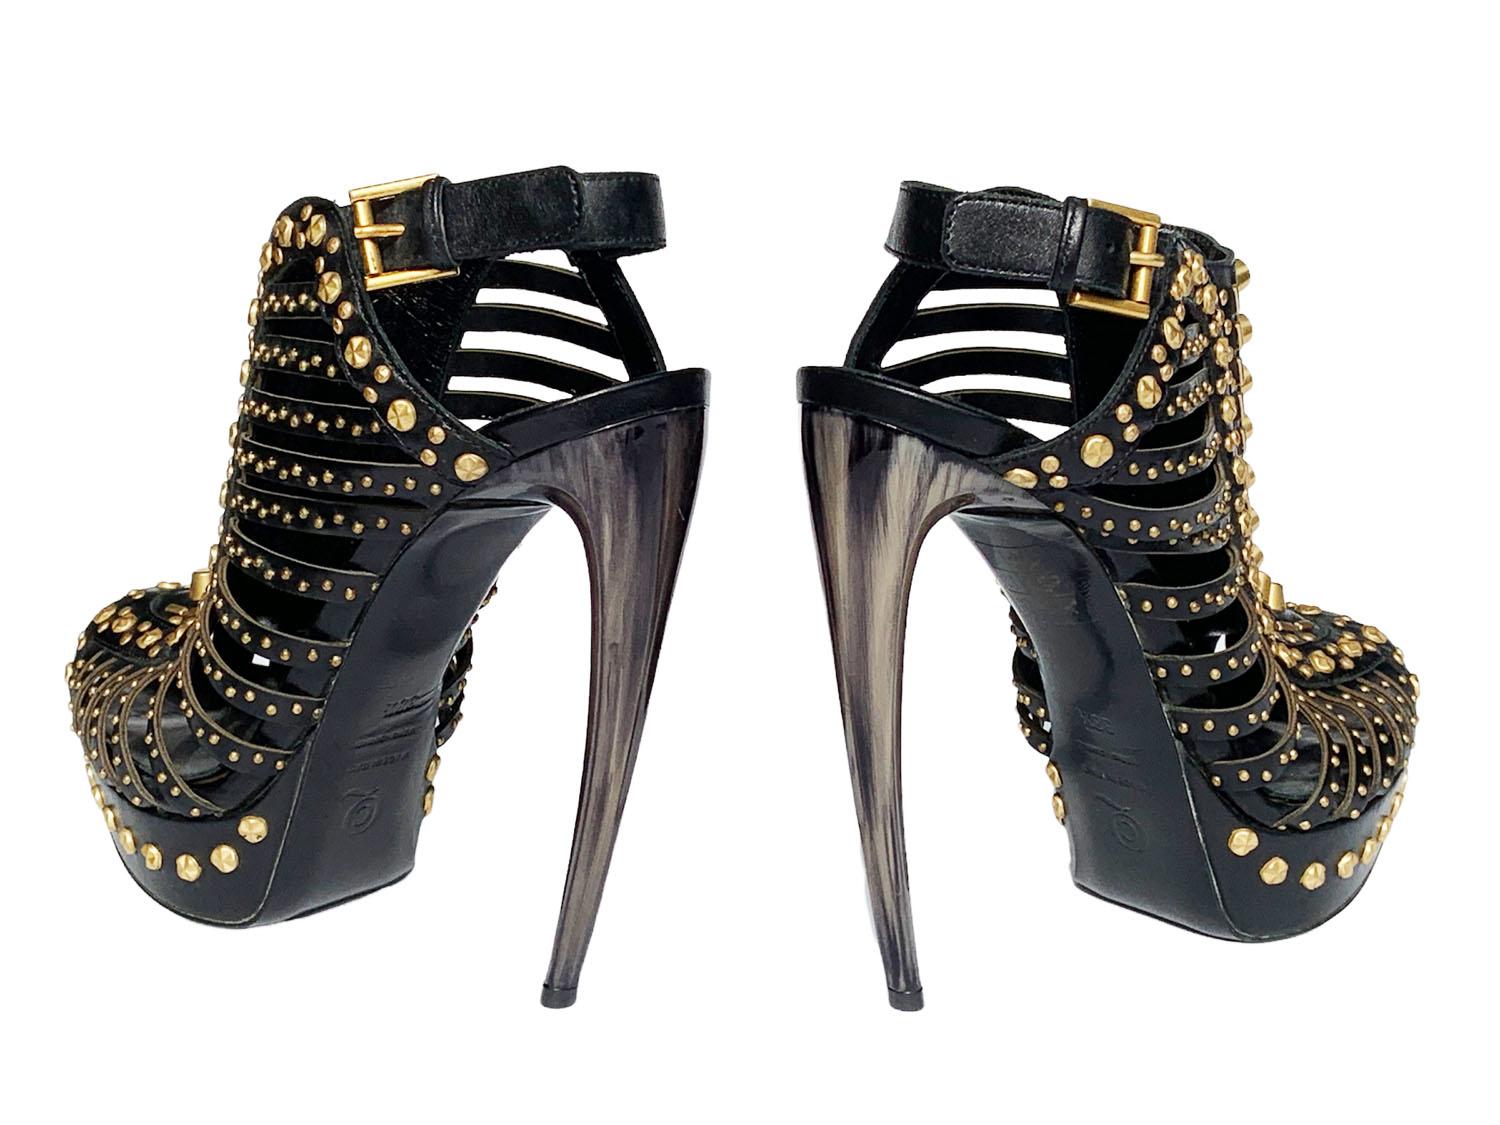 New Alexander McQueen S/S 2012 Leather Studded Horn Heel Platform Sandals 38.5  In New Condition For Sale In Montgomery, TX